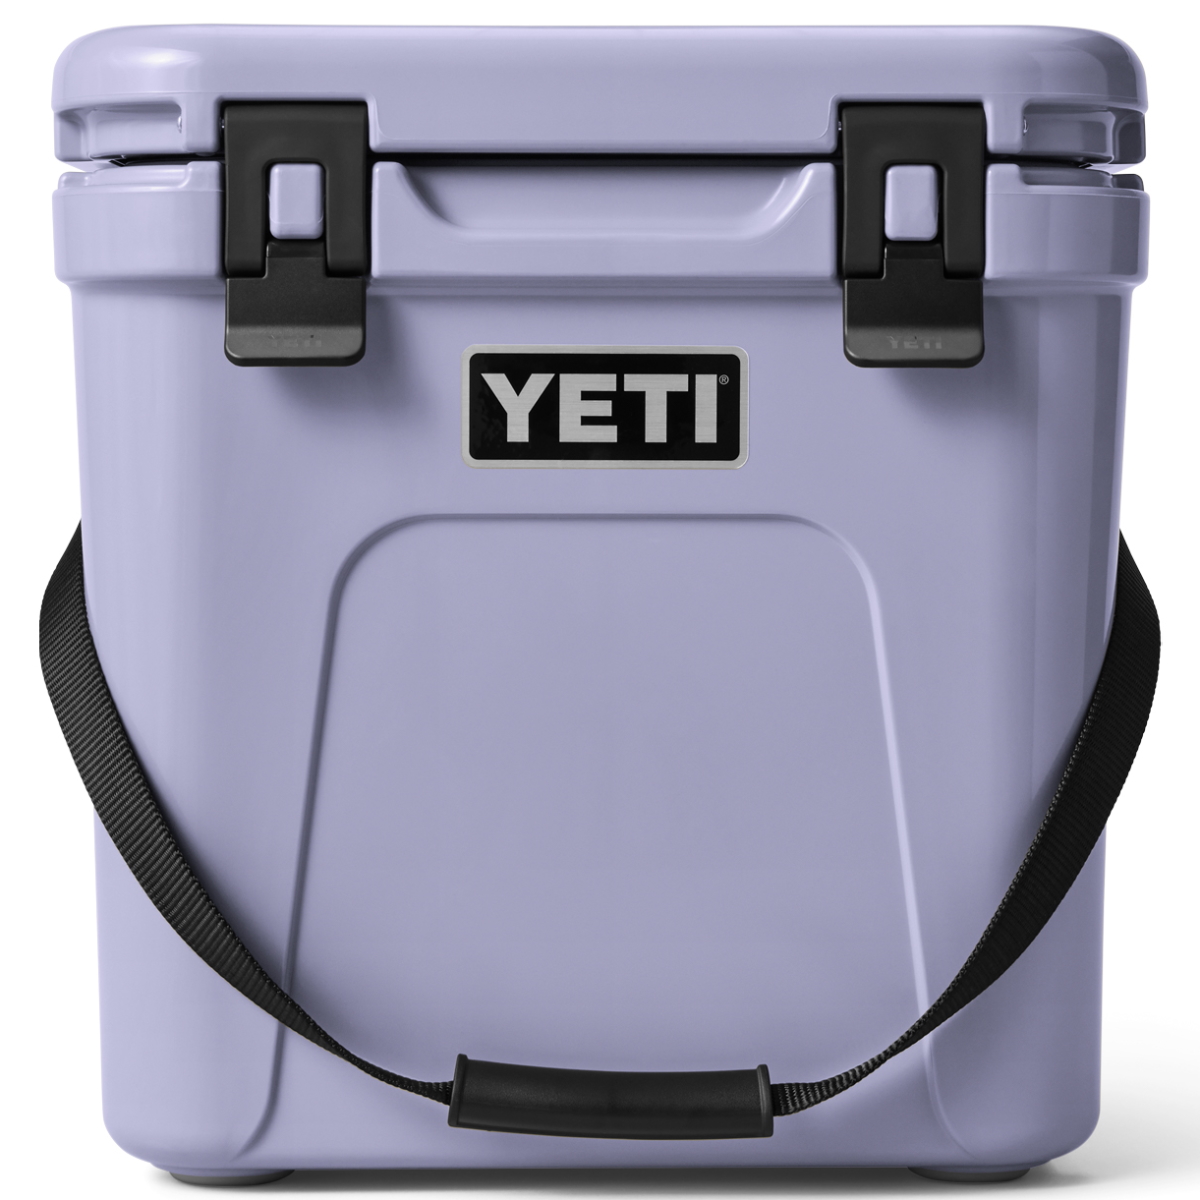 YETI - You asked, you got it. Sagebrush Green is now available in